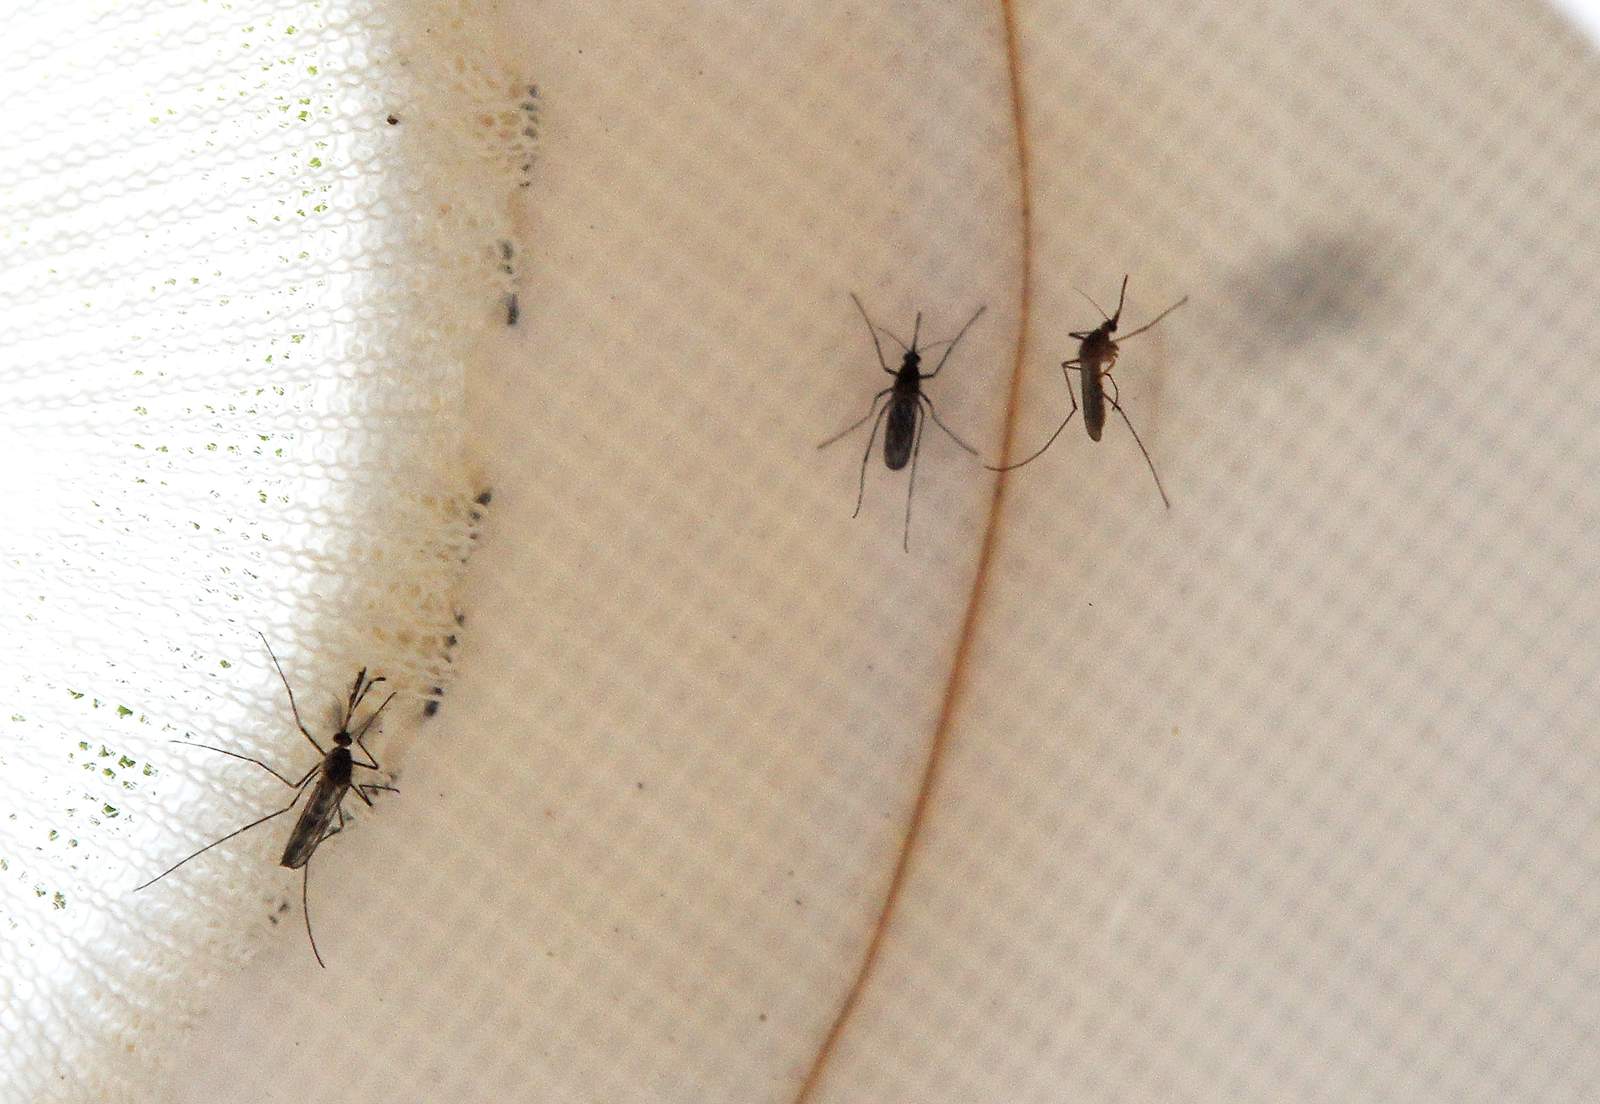 Health officials report 10 West Nile virus cases in Miami